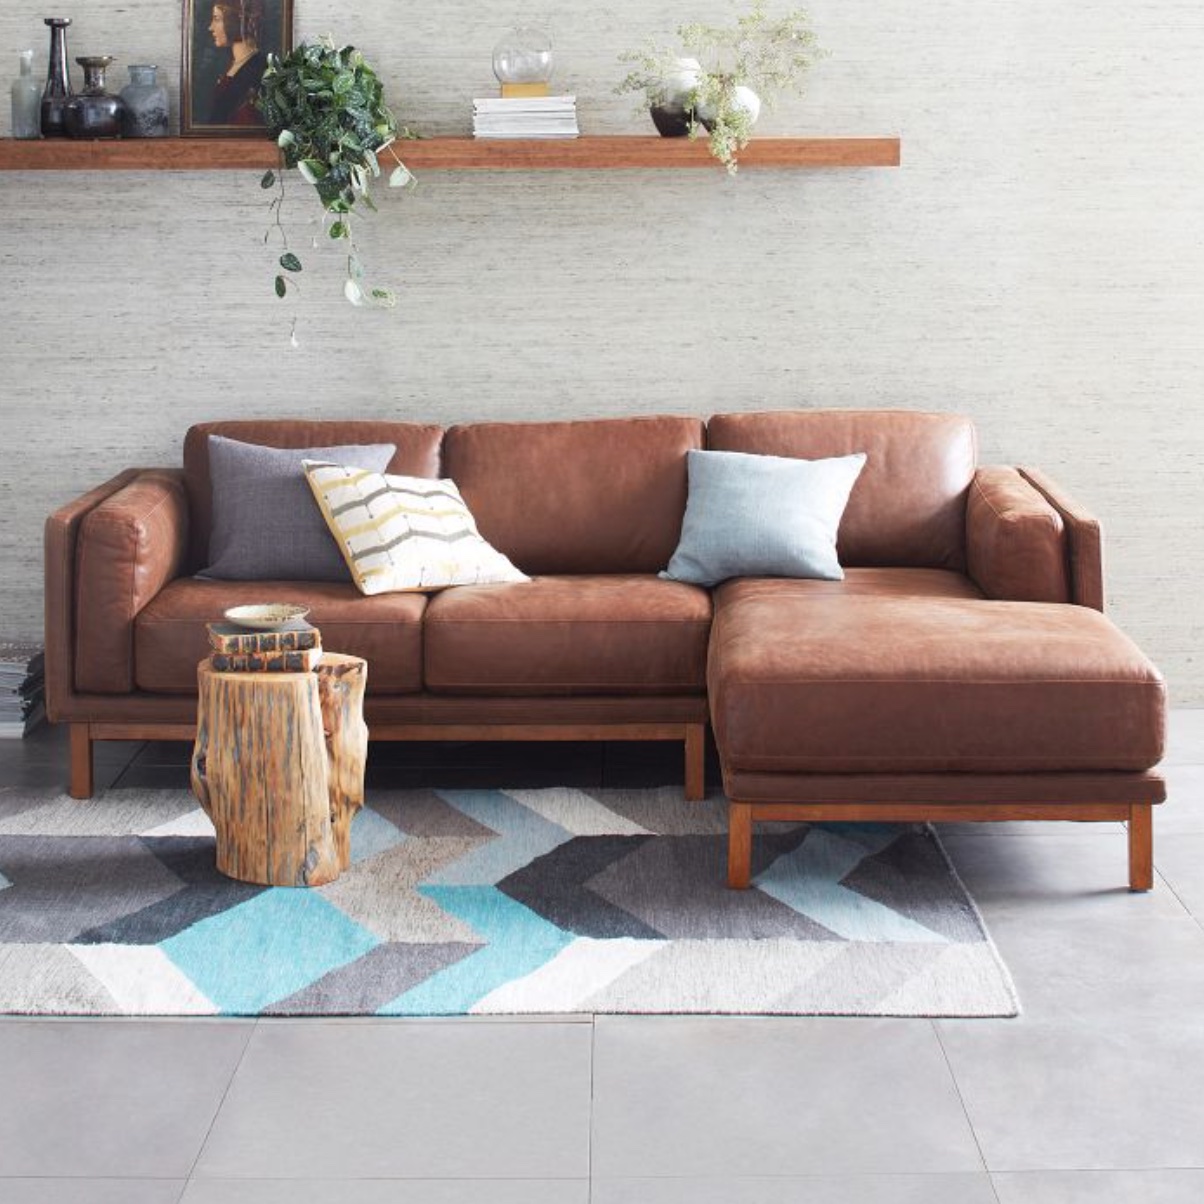 A West Elm Couch in a styled living room.